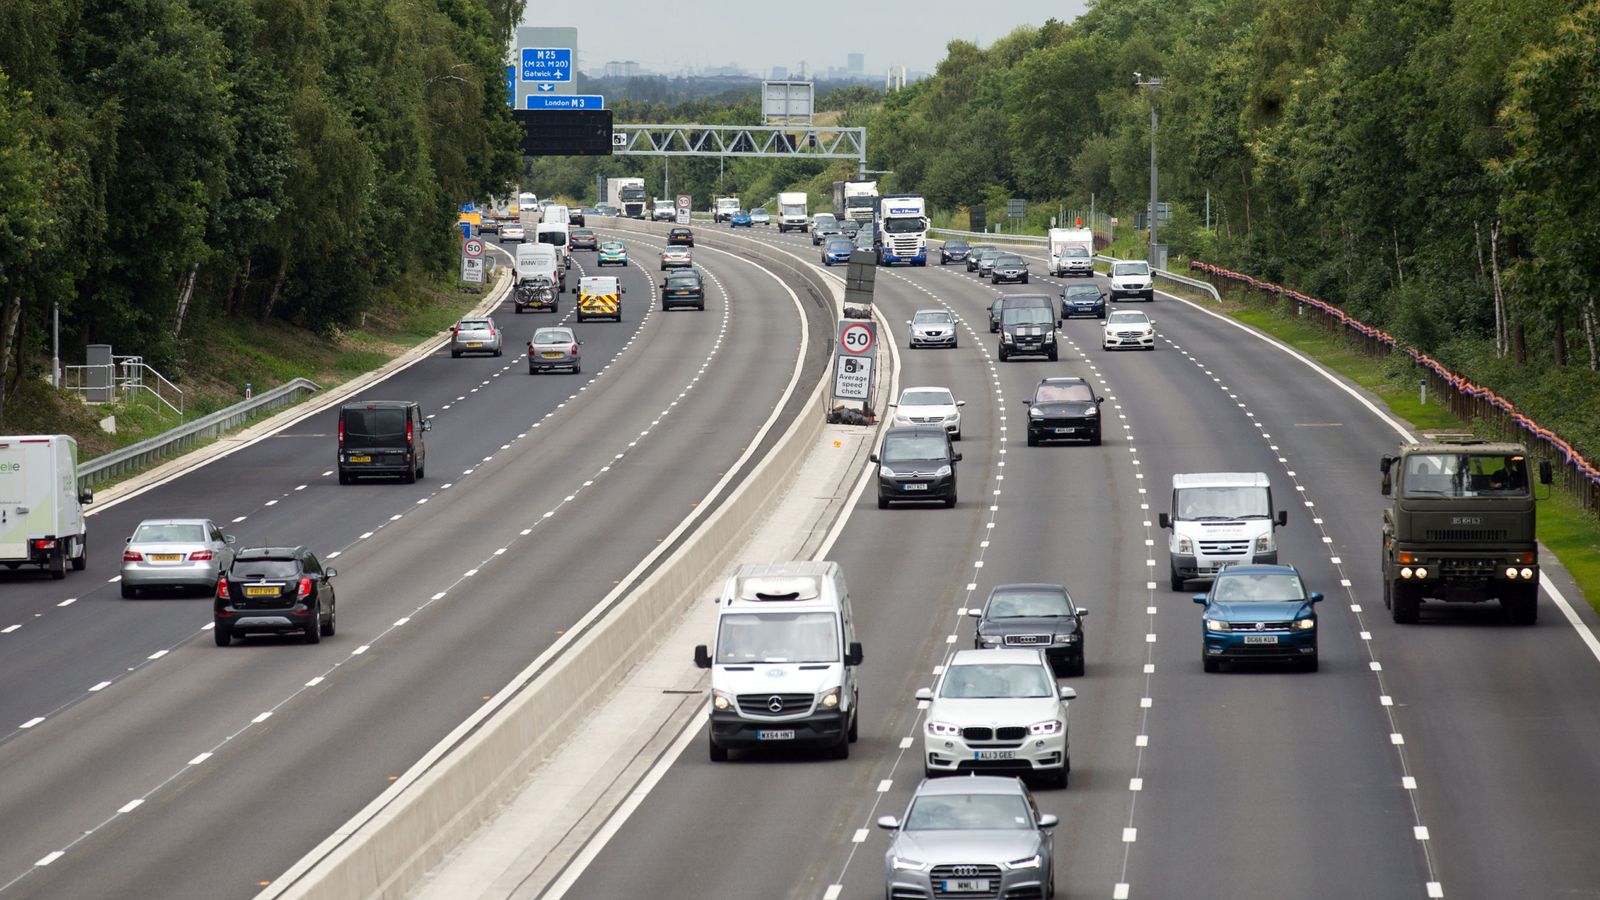 Smart motorways: Government halts rollout amid safety concerns after inquiry